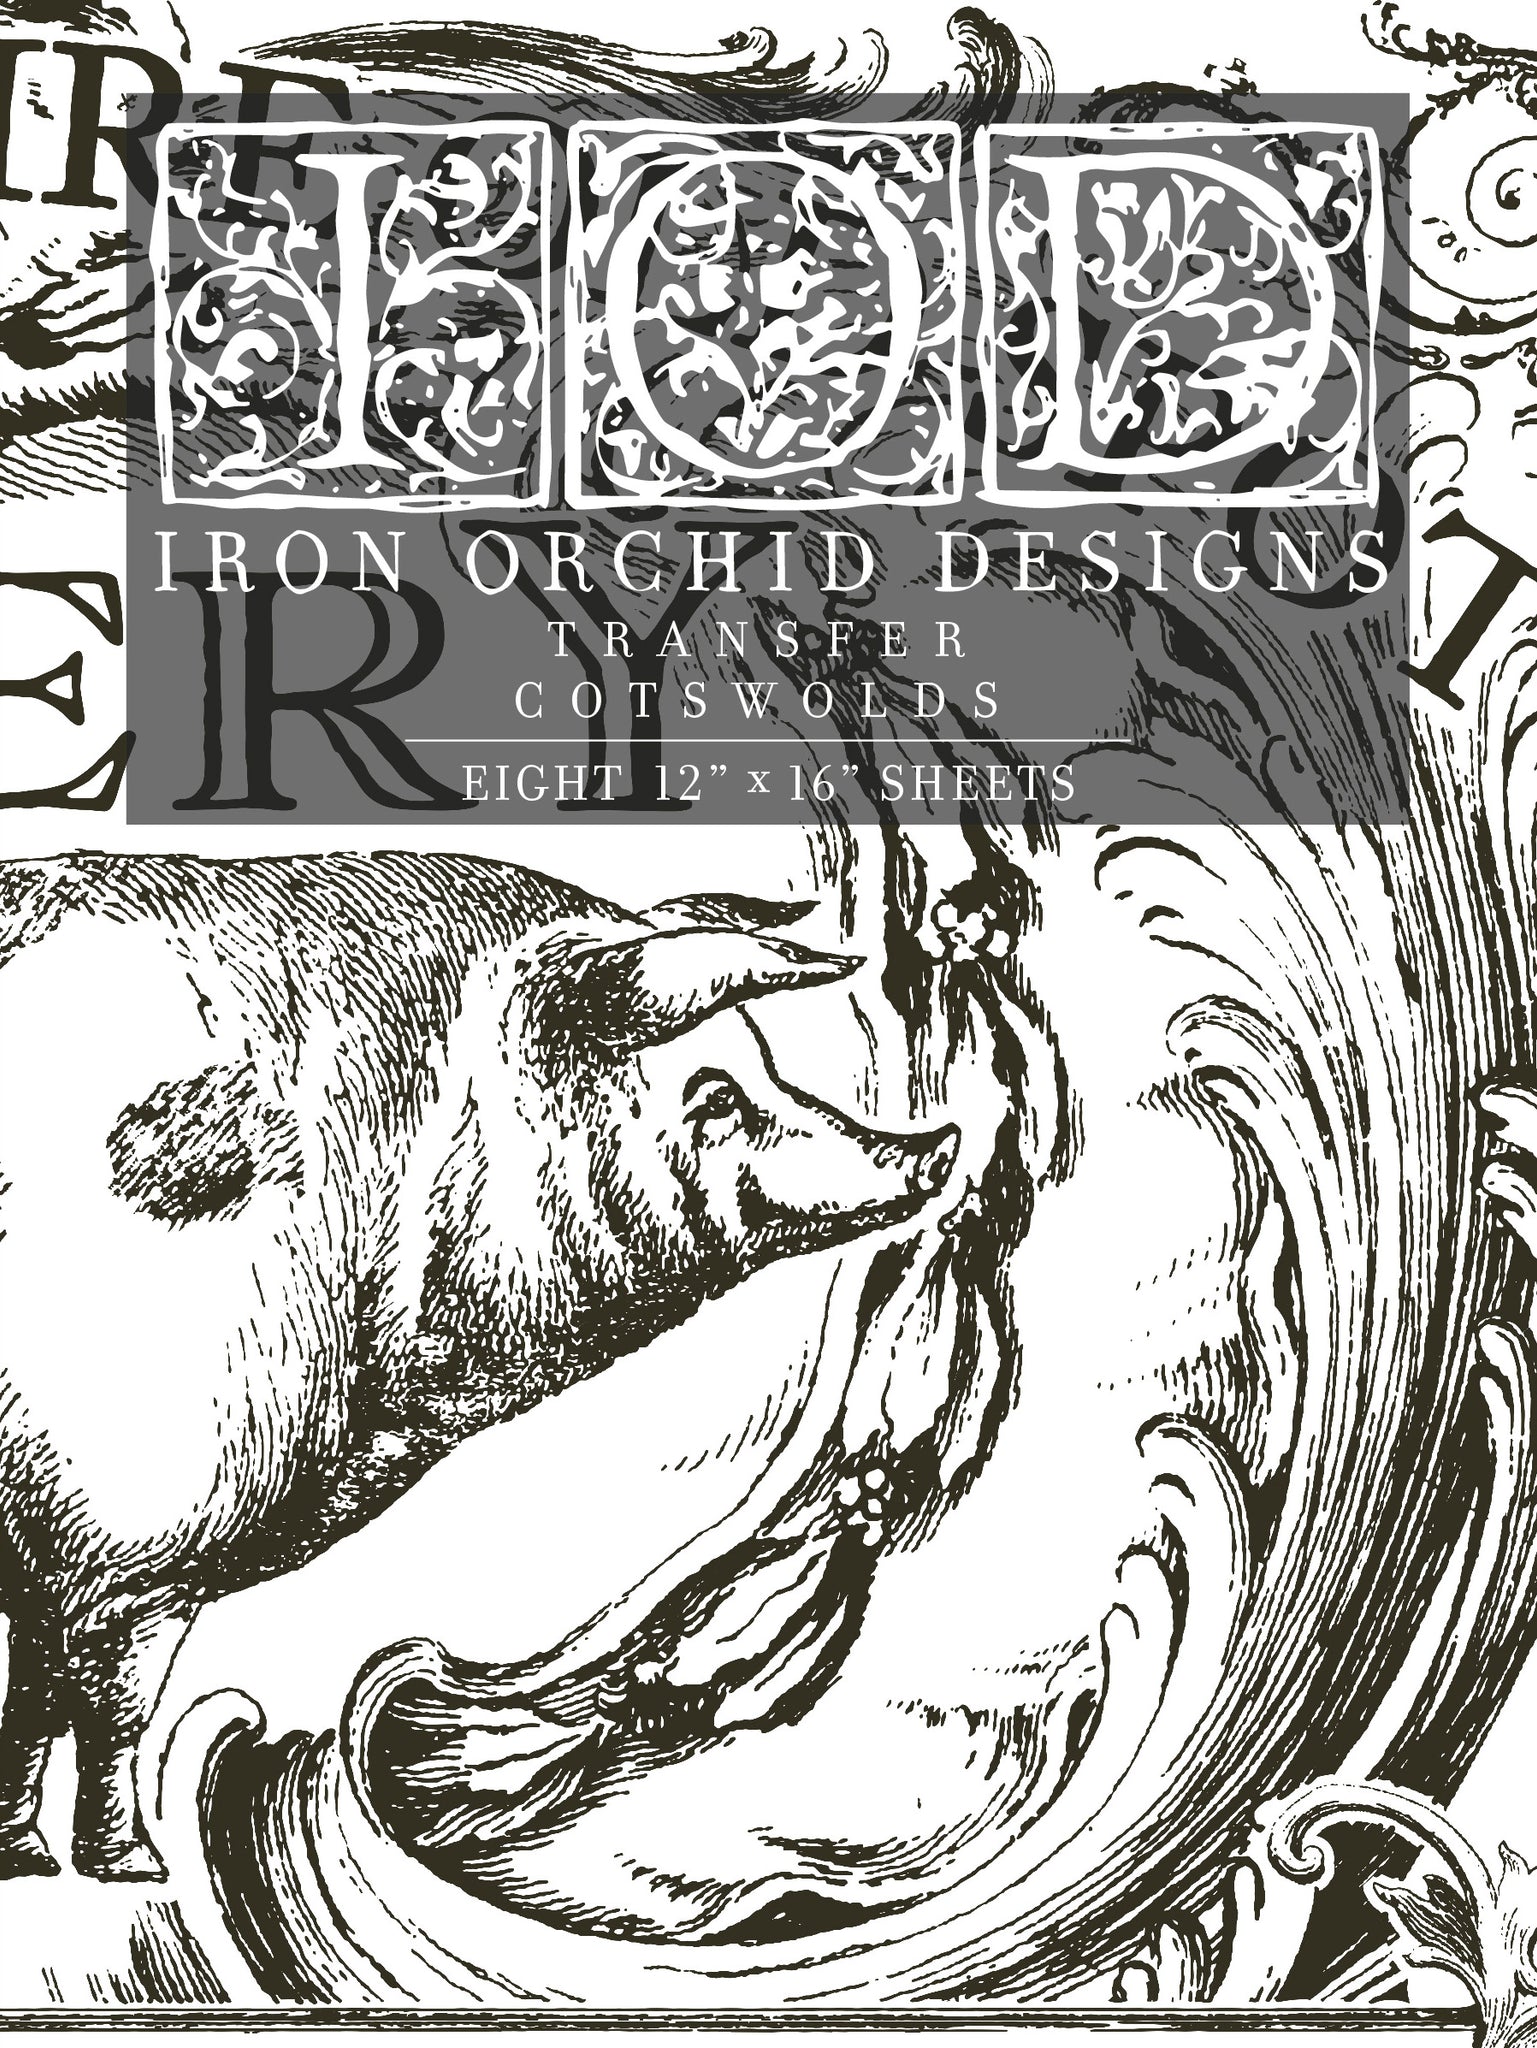 Cotswolds Transfer by IOD - Iron Orchid Designs